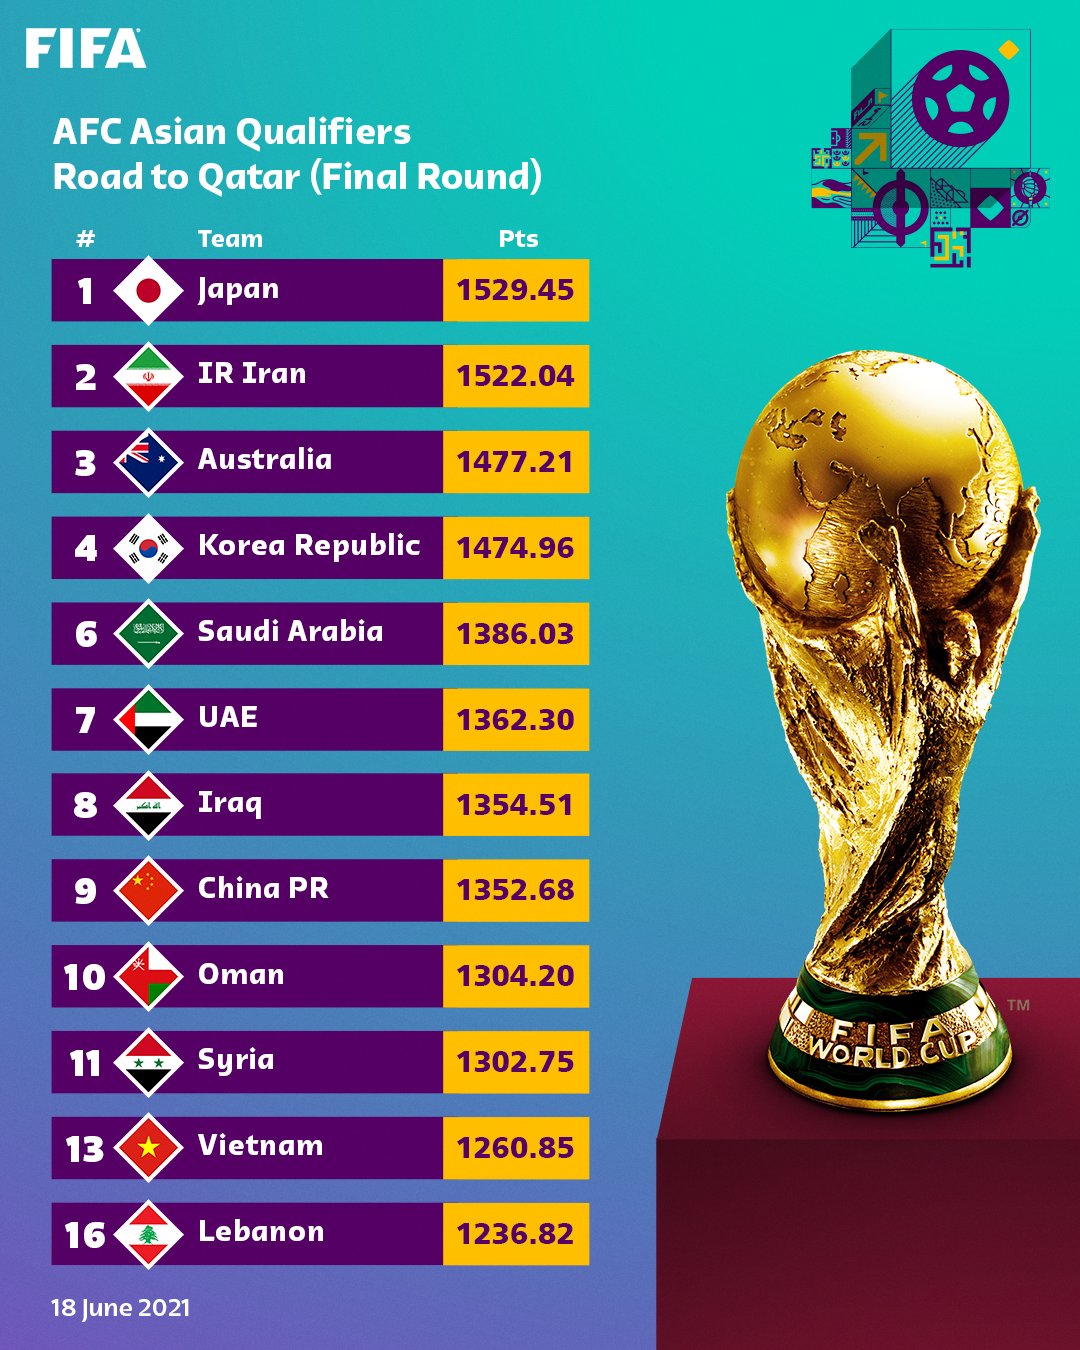 World Cup 2022: Ranking the qualified teams into tiers